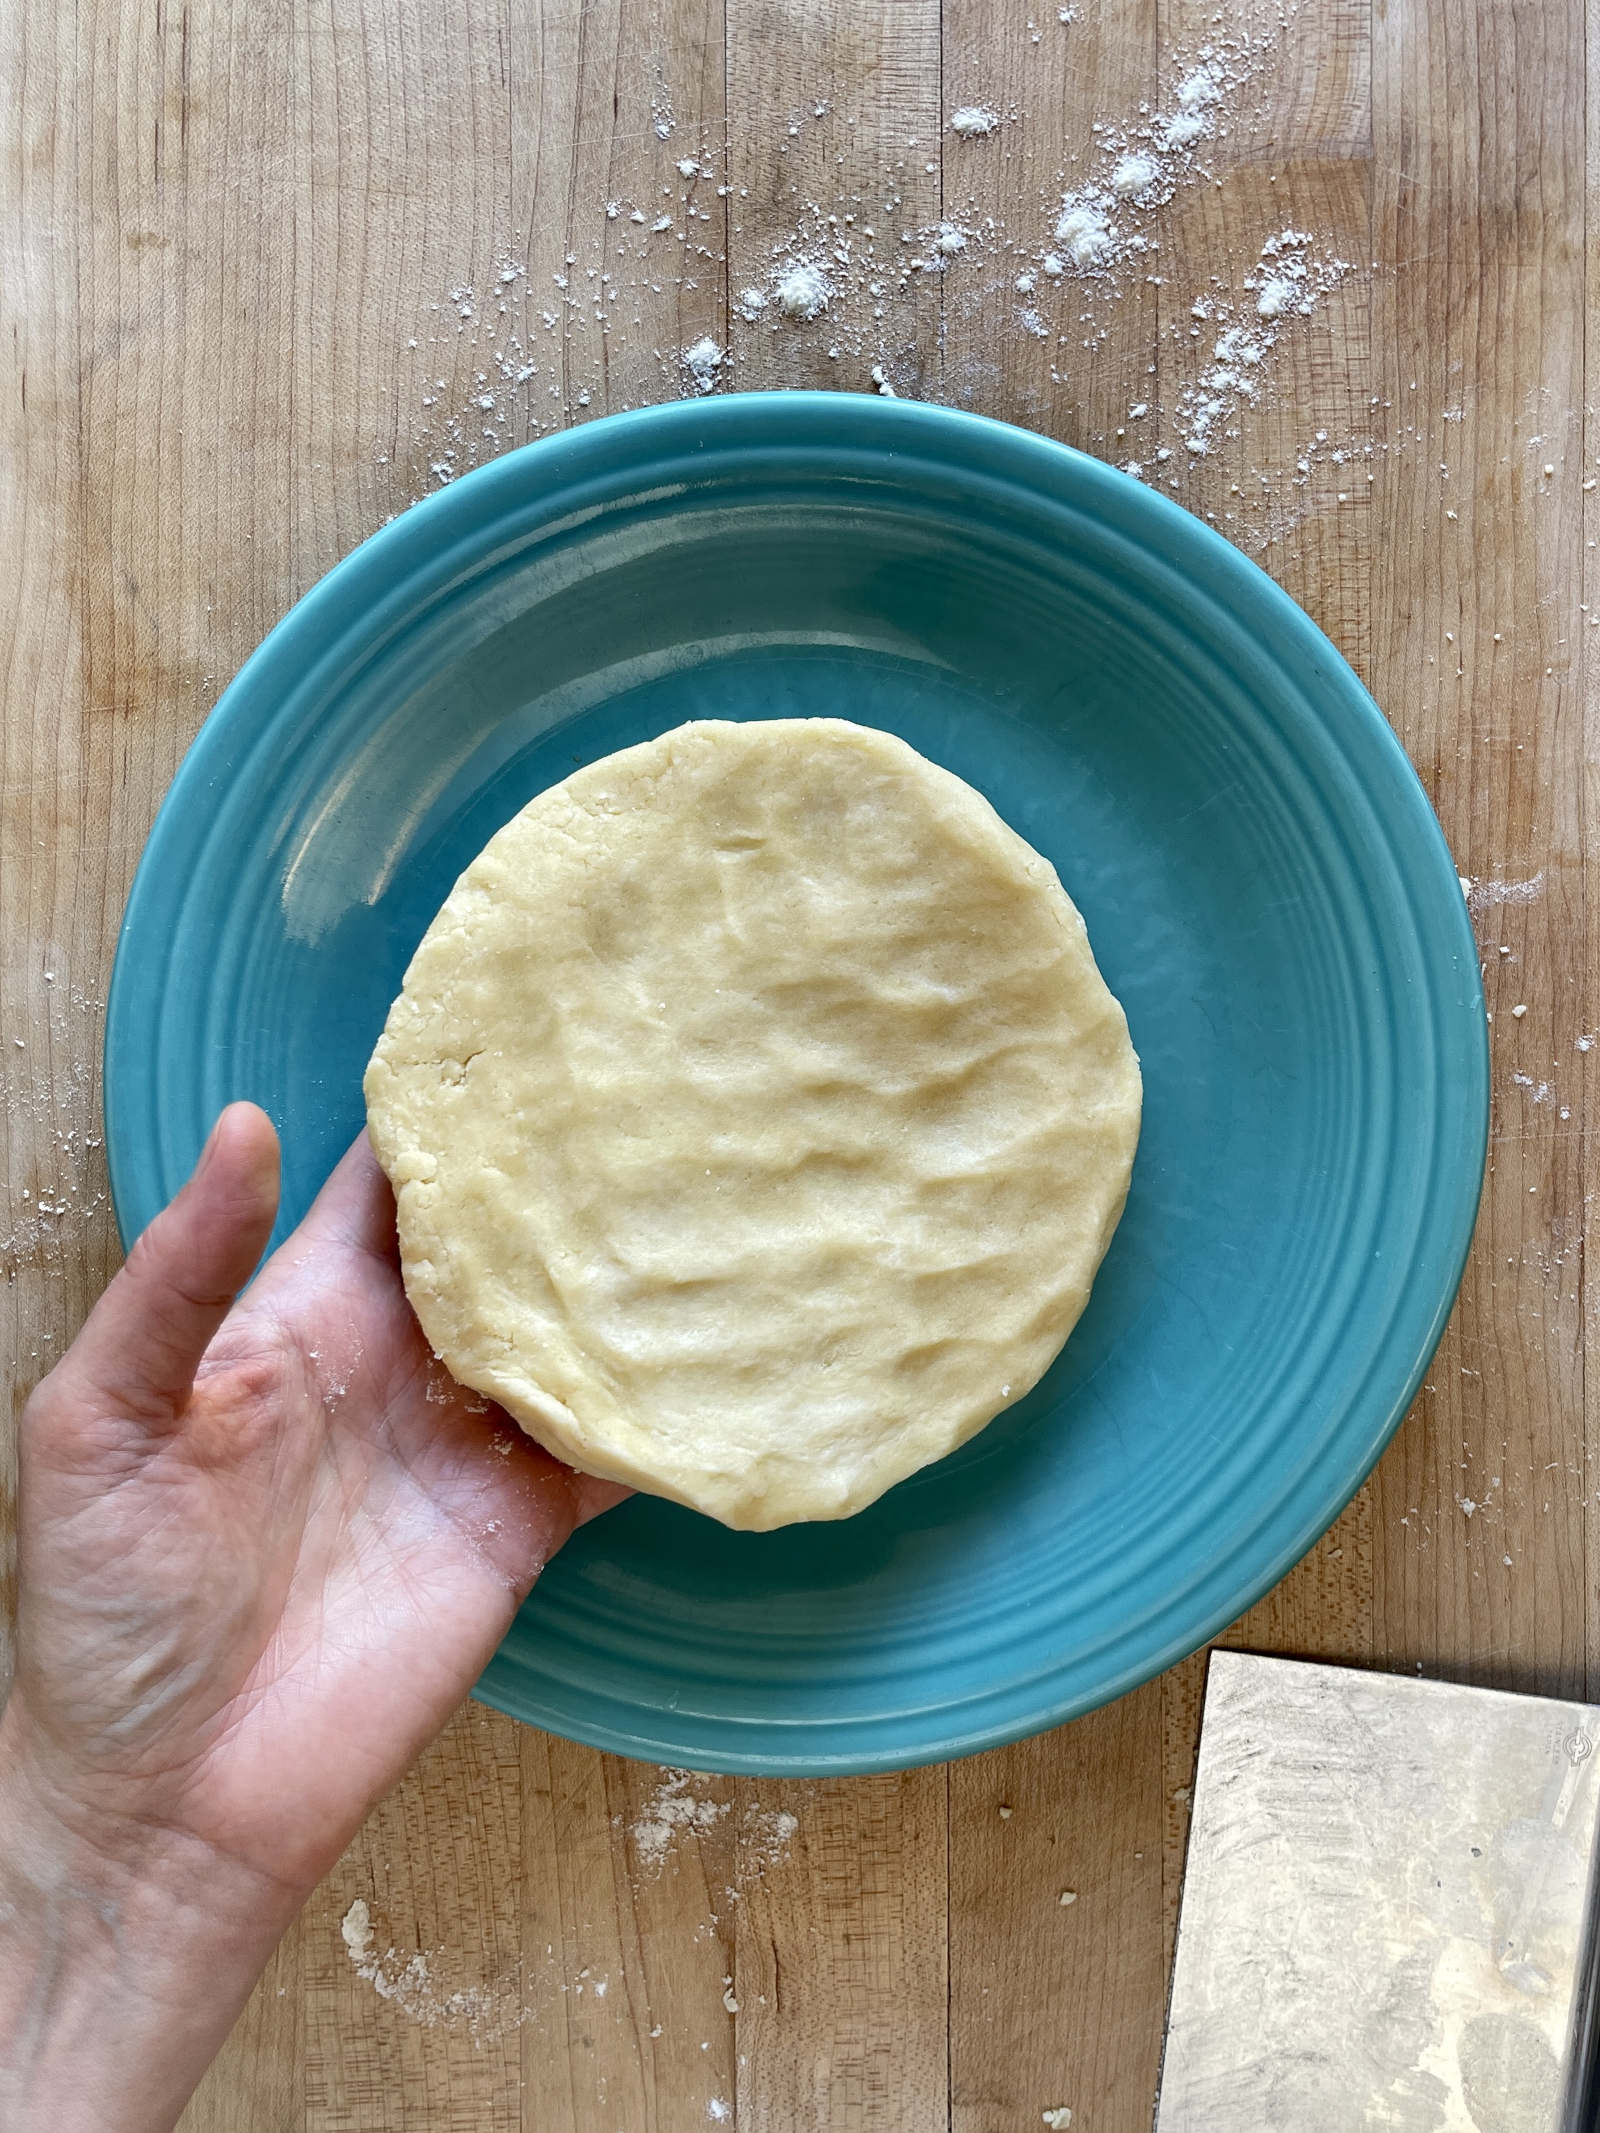 A hand places a disk of semolina pastry on a turquoise colored plate